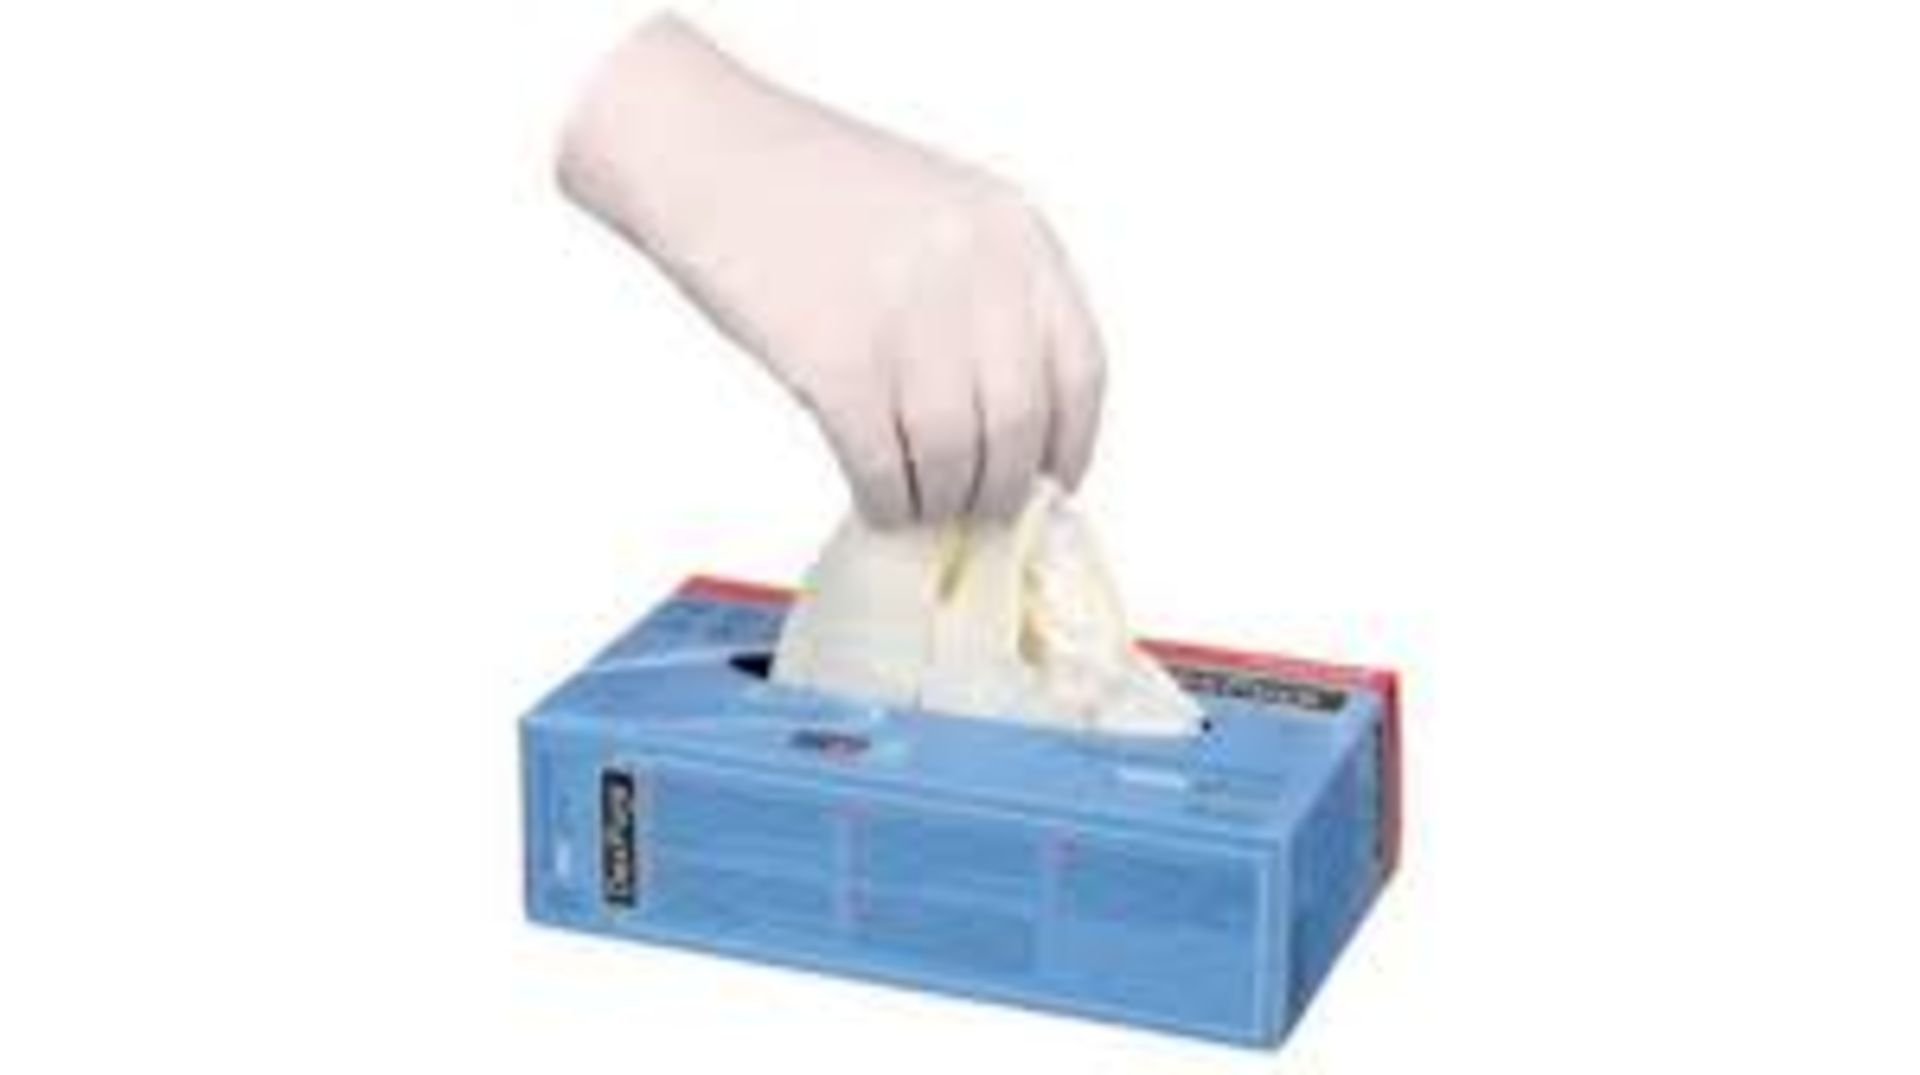 540 X BRAND NEW BOXES OF 100 HONEYWELL WHITE LATEX GLOVES SIZE SMALL EXP MAY 2024